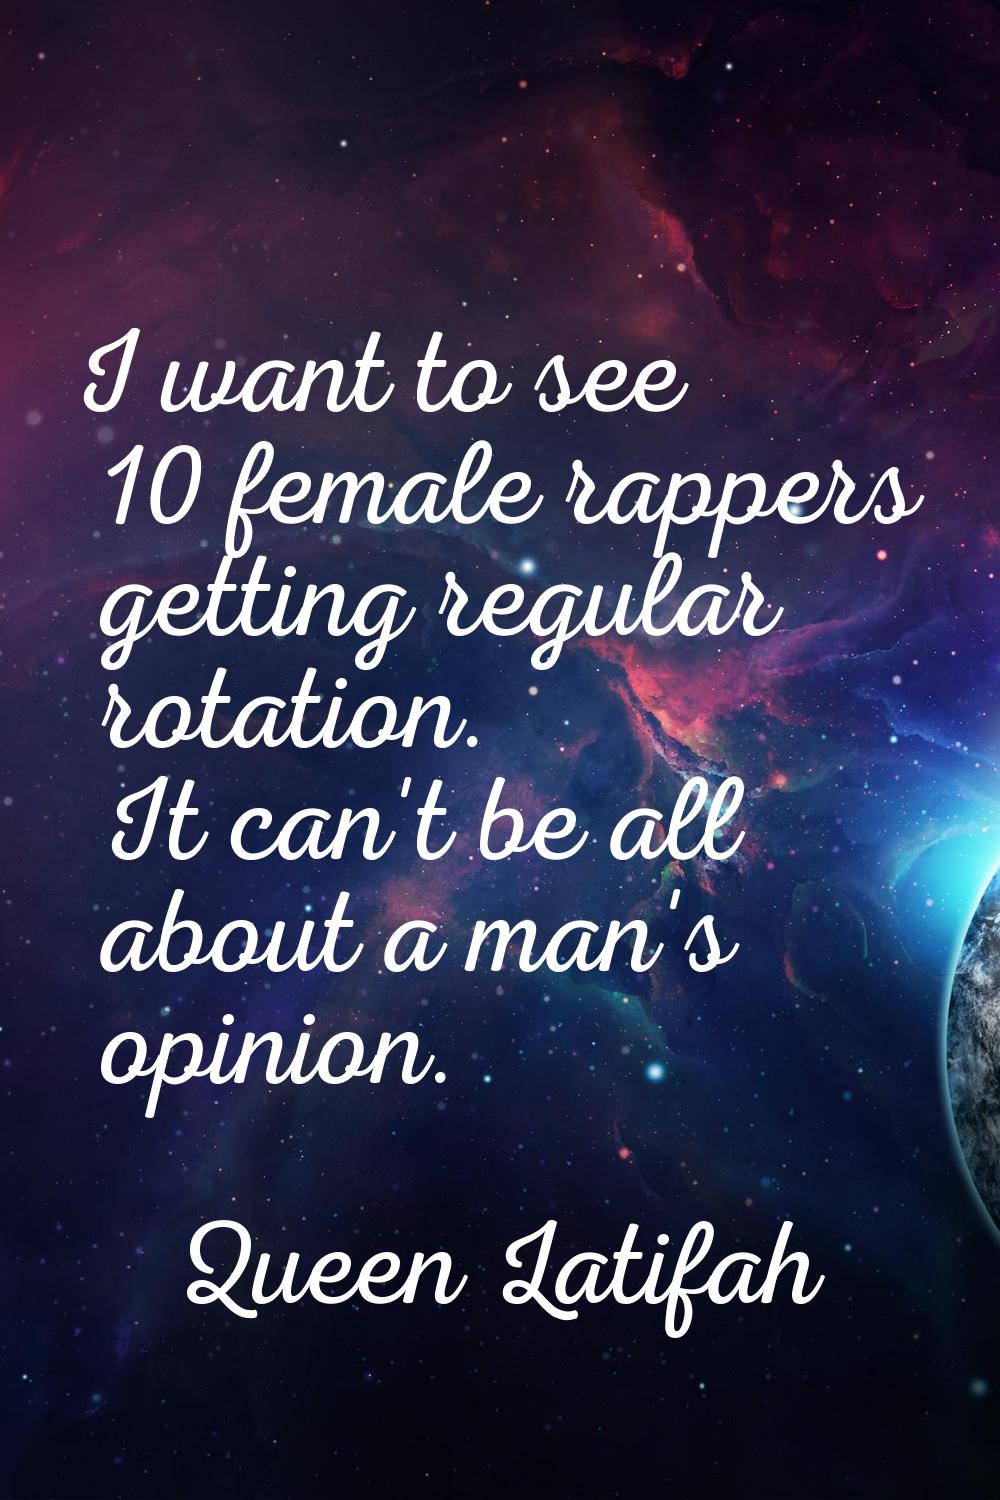 I want to see 10 female rappers getting regular rotation. It can't be all about a man's opinion.